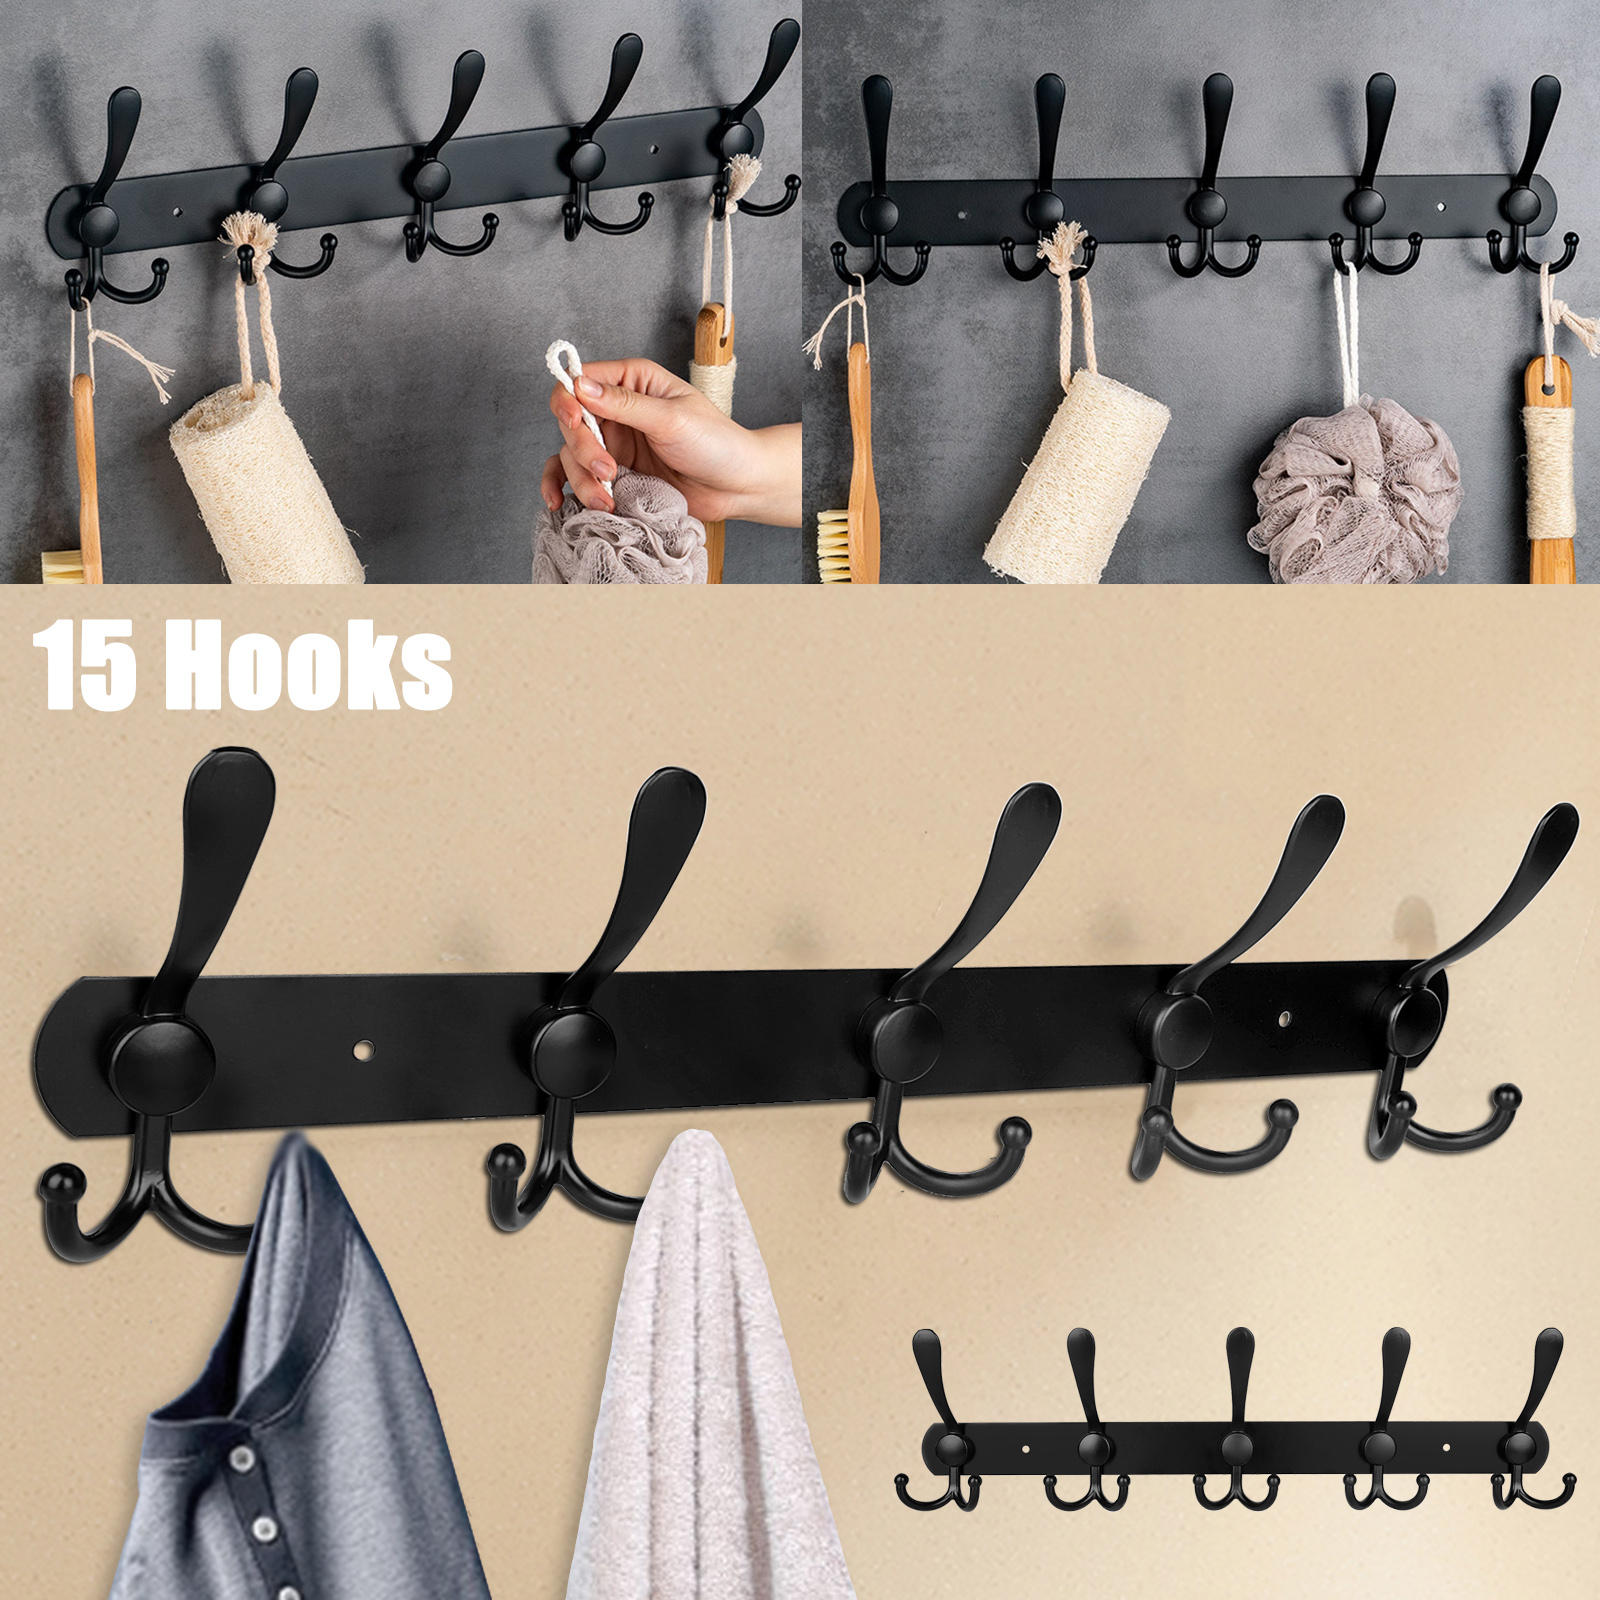 Cap Key Towel PietyPet 15 Pieces Double Prong Robe Hook Cloth Hanger and 10 Pieces Heavy Duty Dual Coat Hooks Wall Mounted with Screws for Coat Black Cup Bag Hat Scarf 